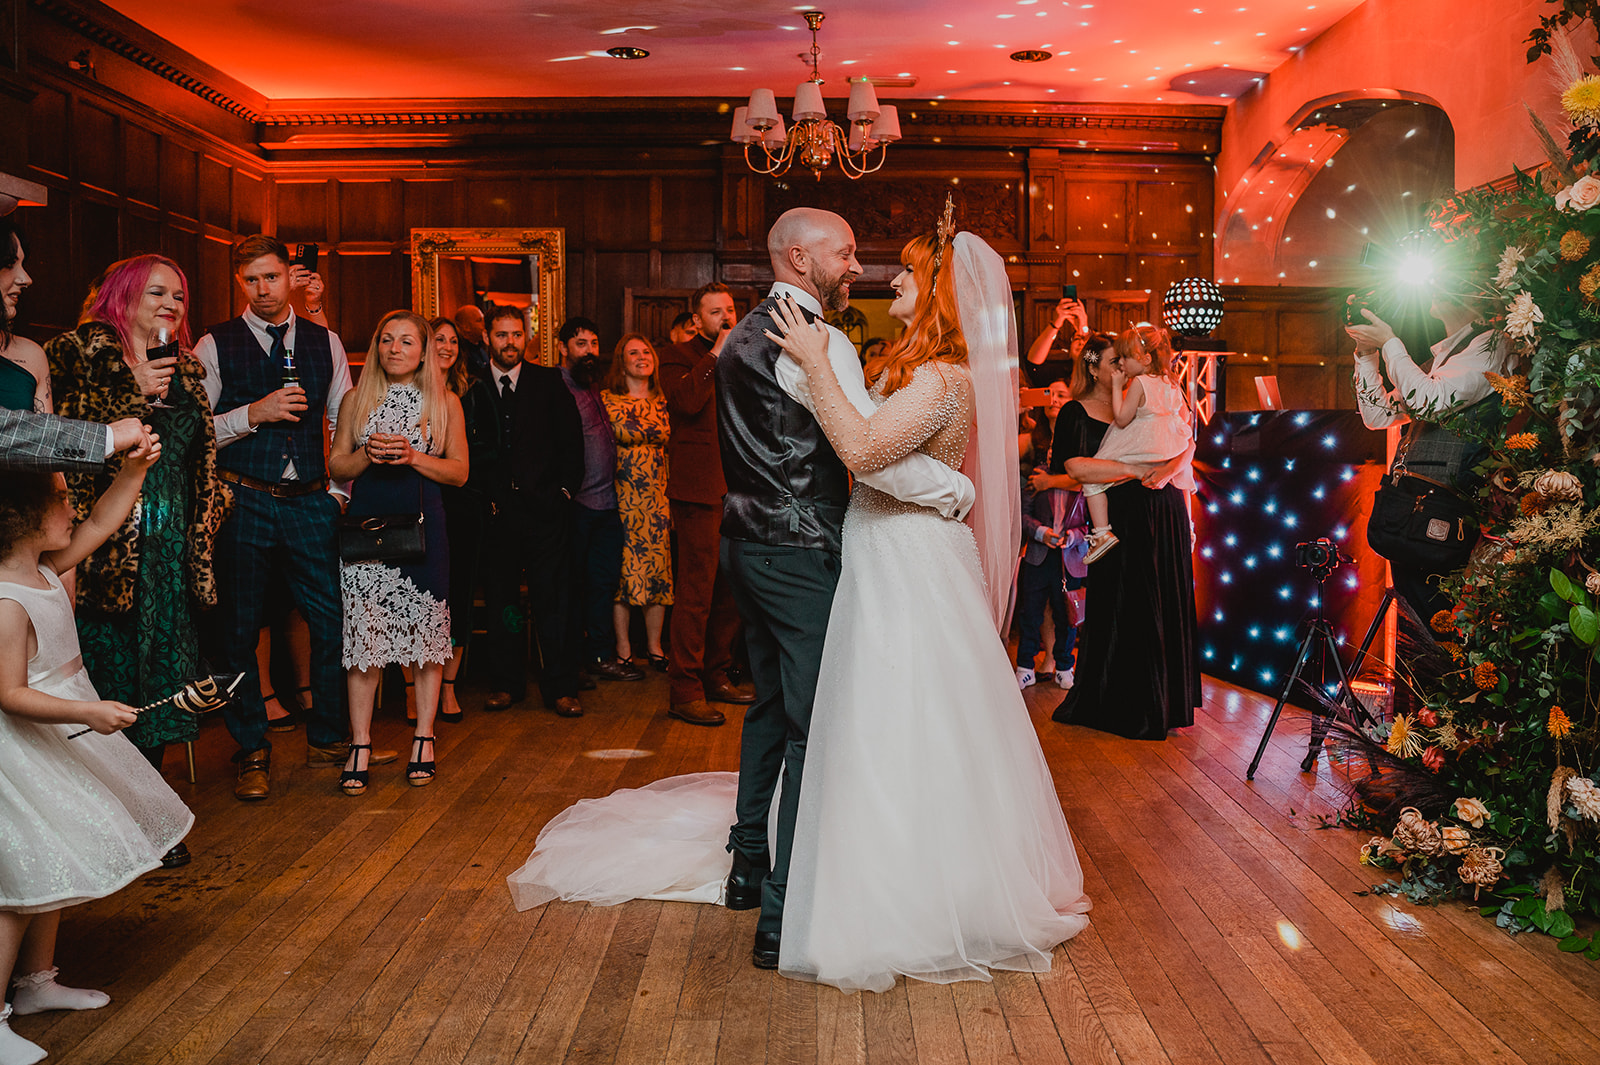 A bride and groom enjoy a first dance during their wedding at Lanwades Hall